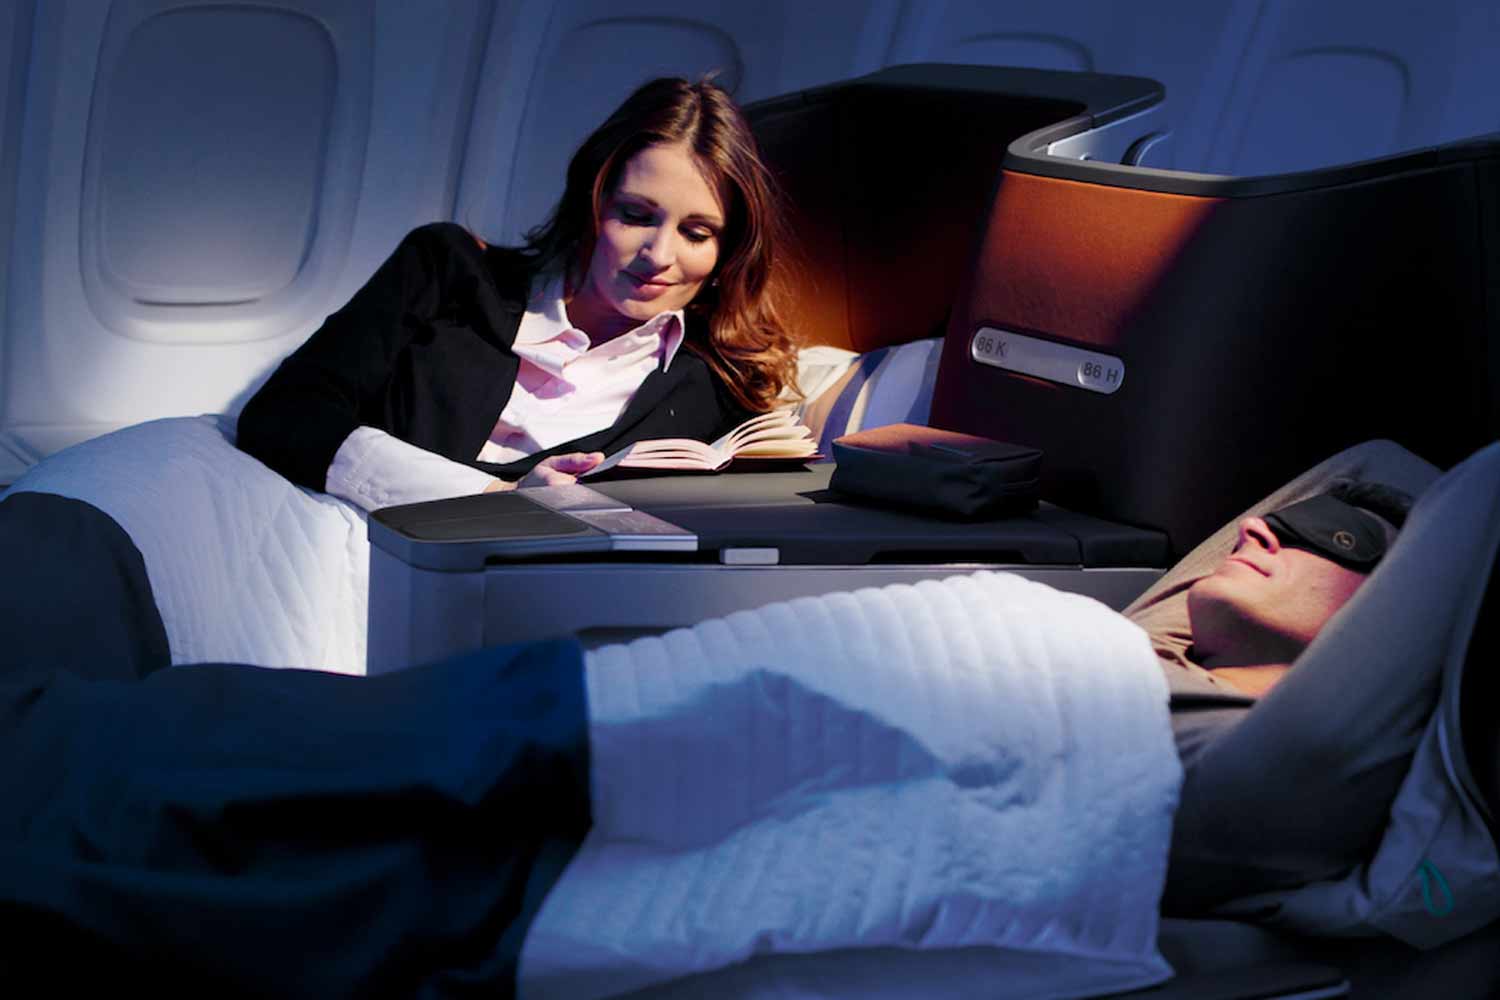 Woman's 'Selfish' Business Class Move Sparks Age-Old Debate